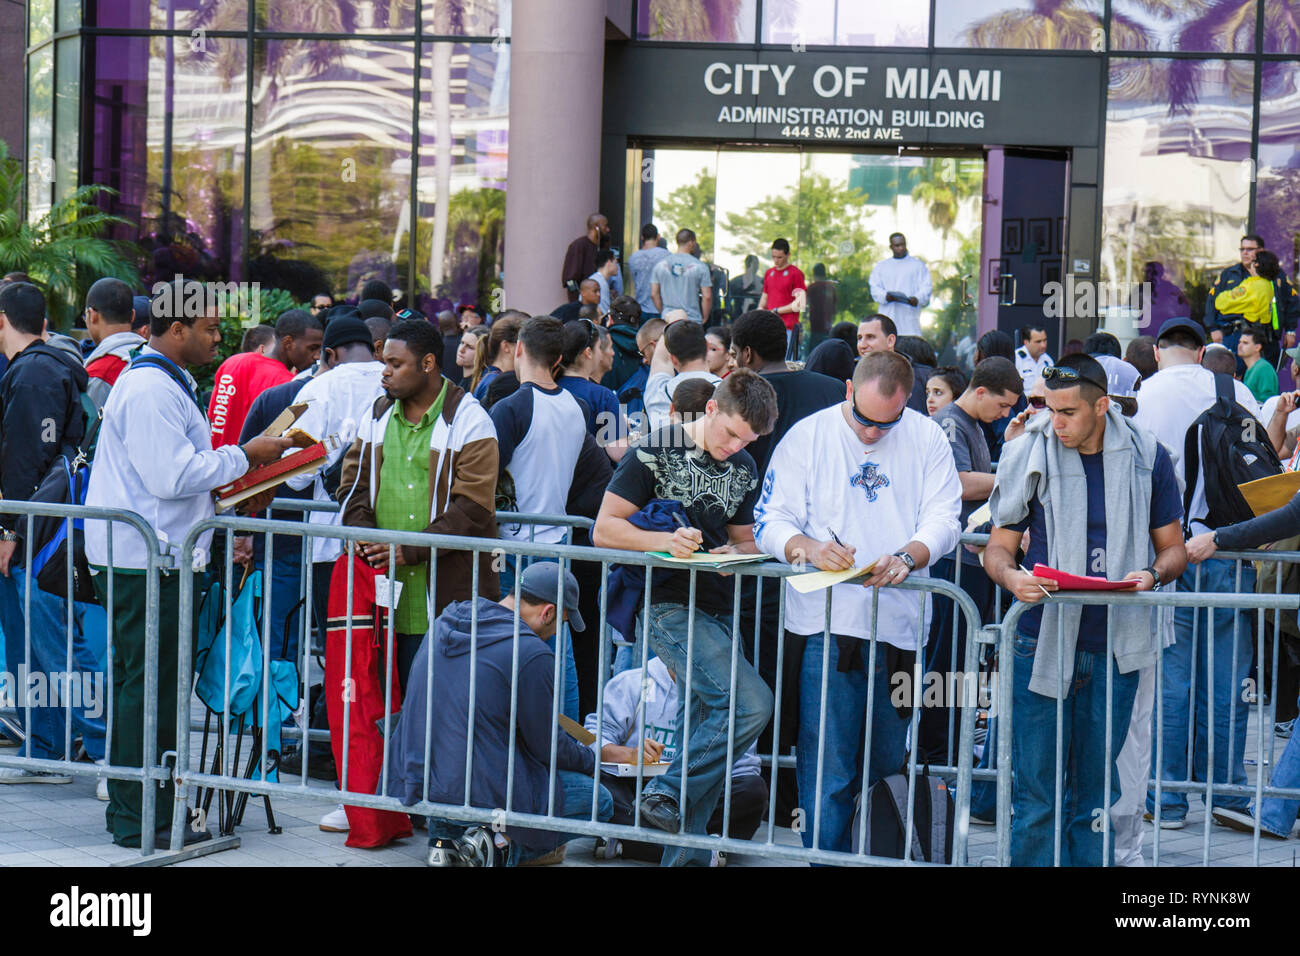 Miami Florida,Riverside Center,government administration building,city job applicant,apply,city,firefighter,line,queue,employment,unemployment,economy Stock Photo